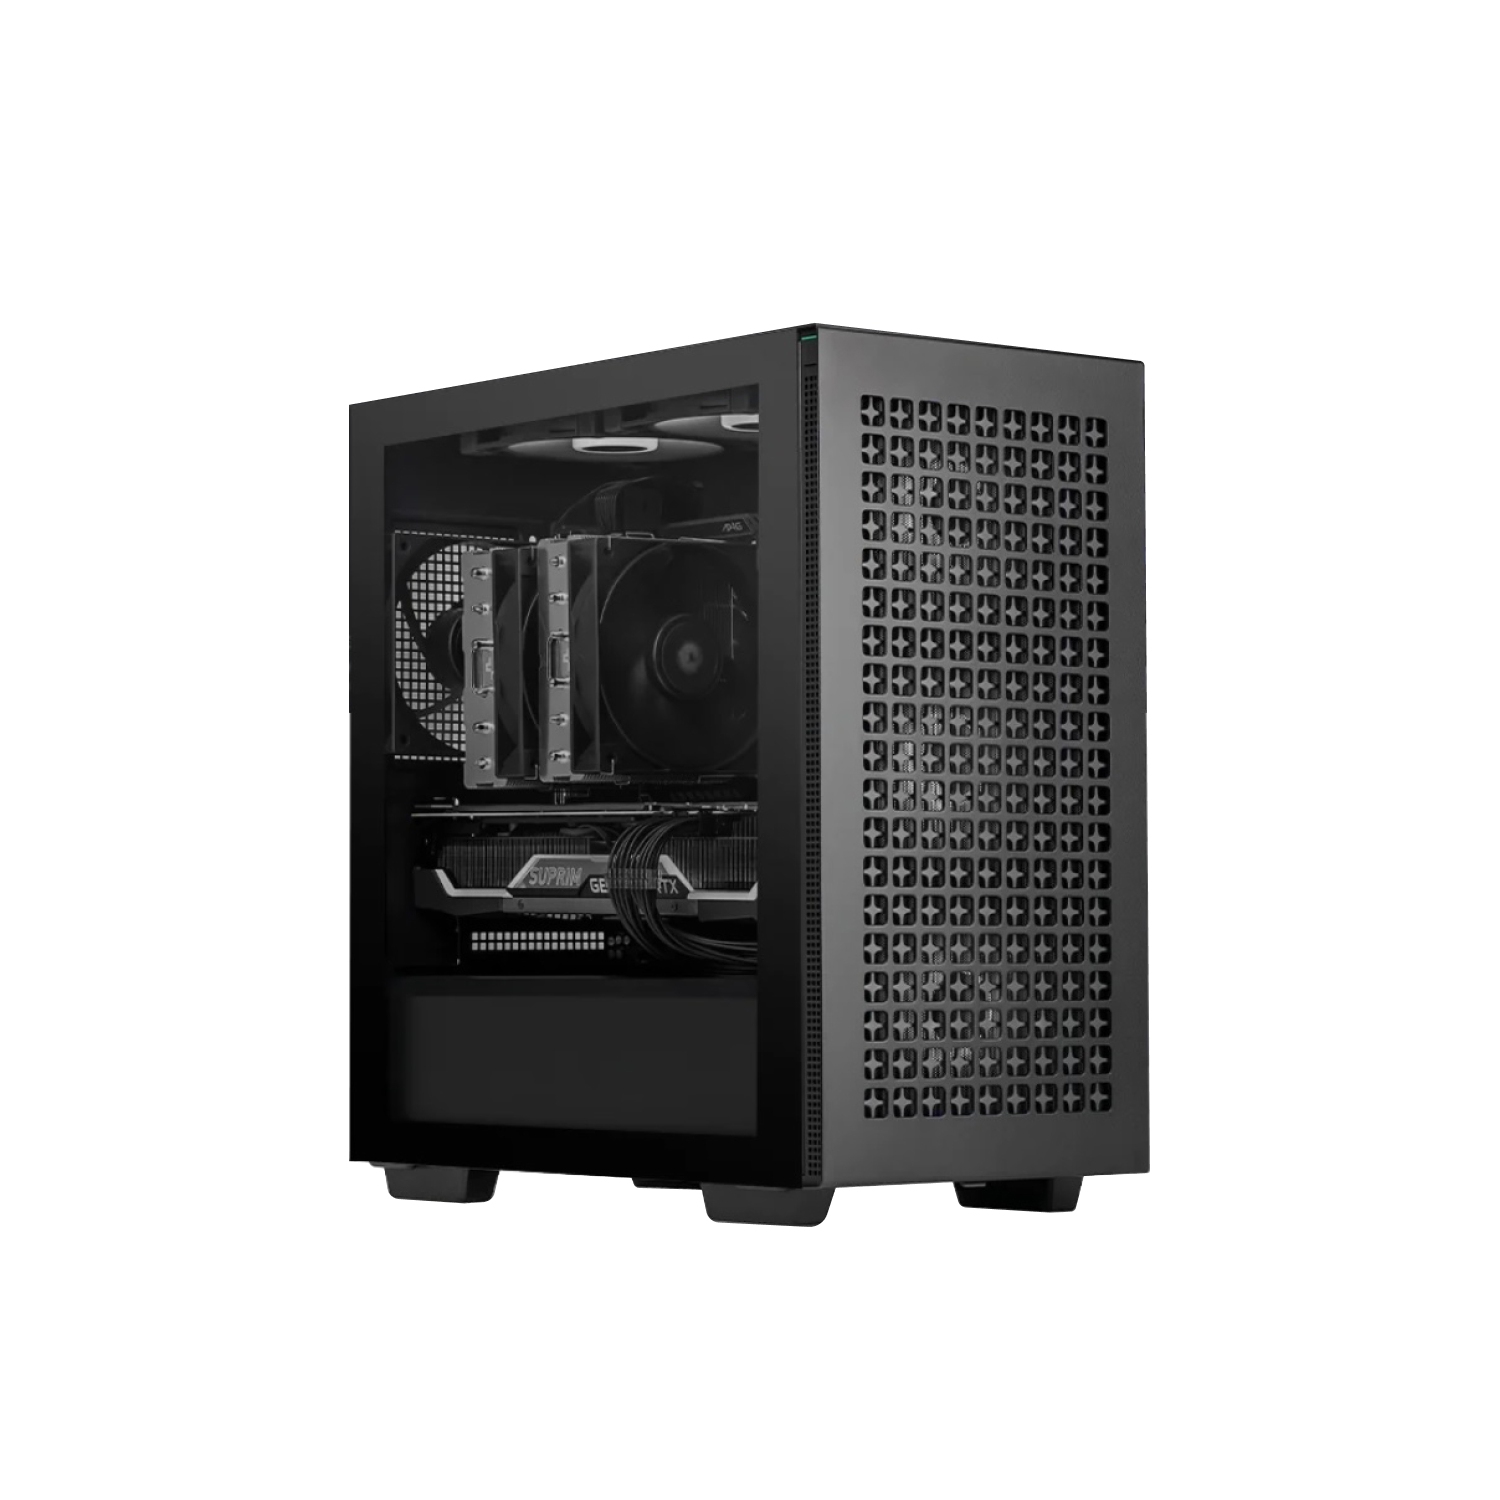 Zonic business Custom PC- Liquid Cooled Intel Core i9-13900K, 24 Cores, 1 TB NVME M.2 SSD, 32 GB DDR5 RAM, Mid-Tower Case, Built-in WIFI, Keyboard, and Mouse, Windows 11 Pro